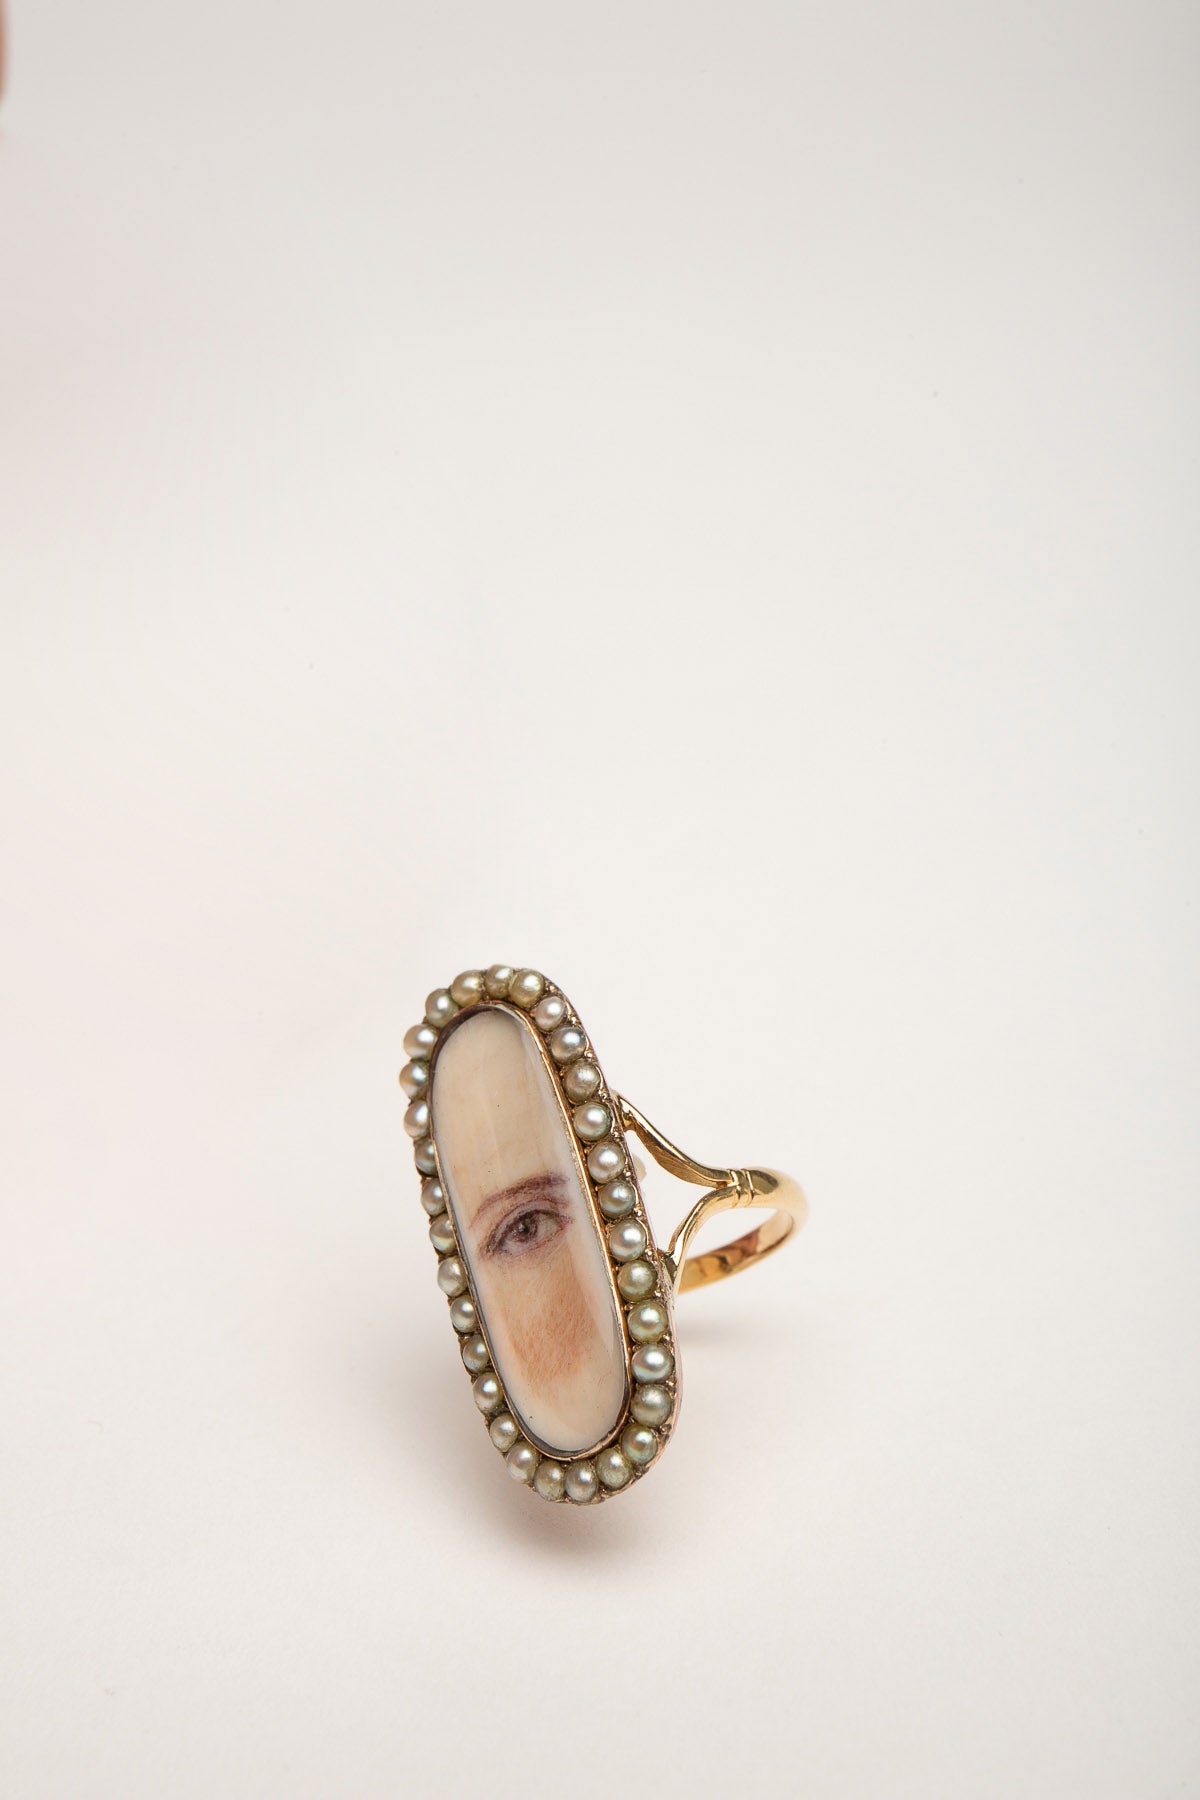 MAXFIELD PRIVATE COLLECTION | 1800'S PAINTED LONG OVAL EYE PEARL RING